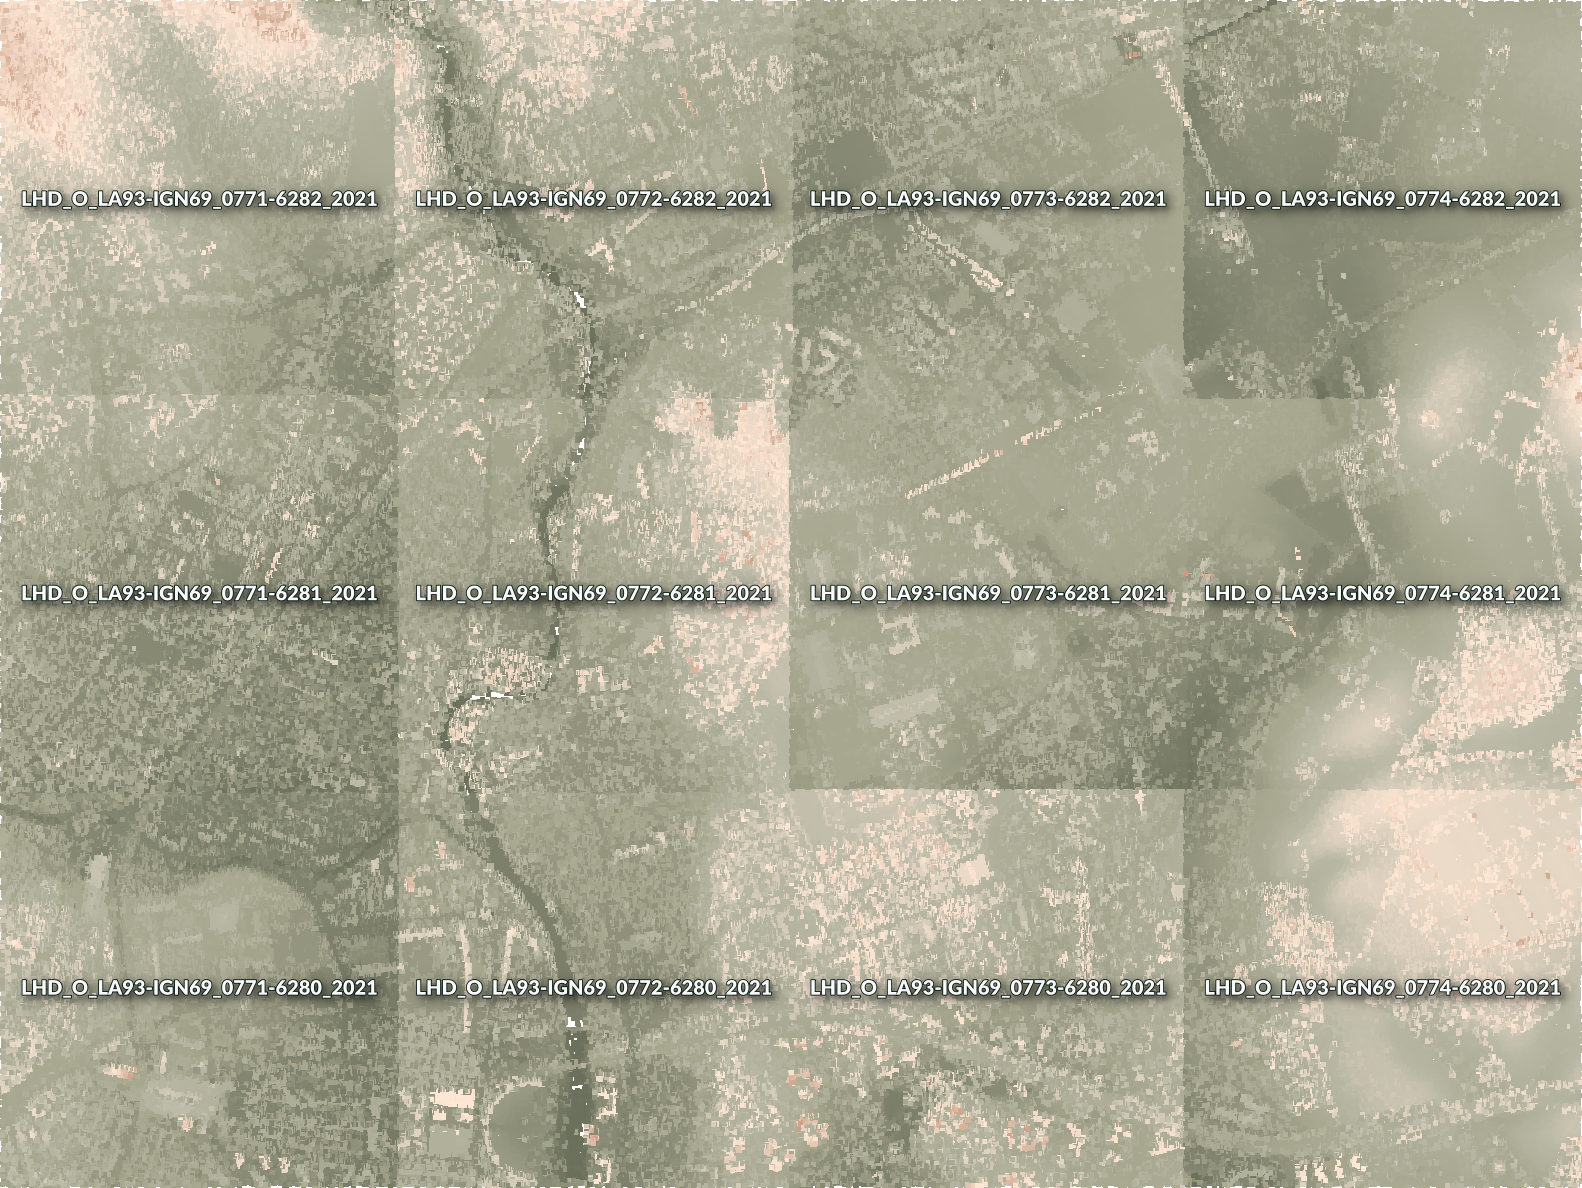 An example of individual point cloud tiles loaded in QGIS, each styled differently